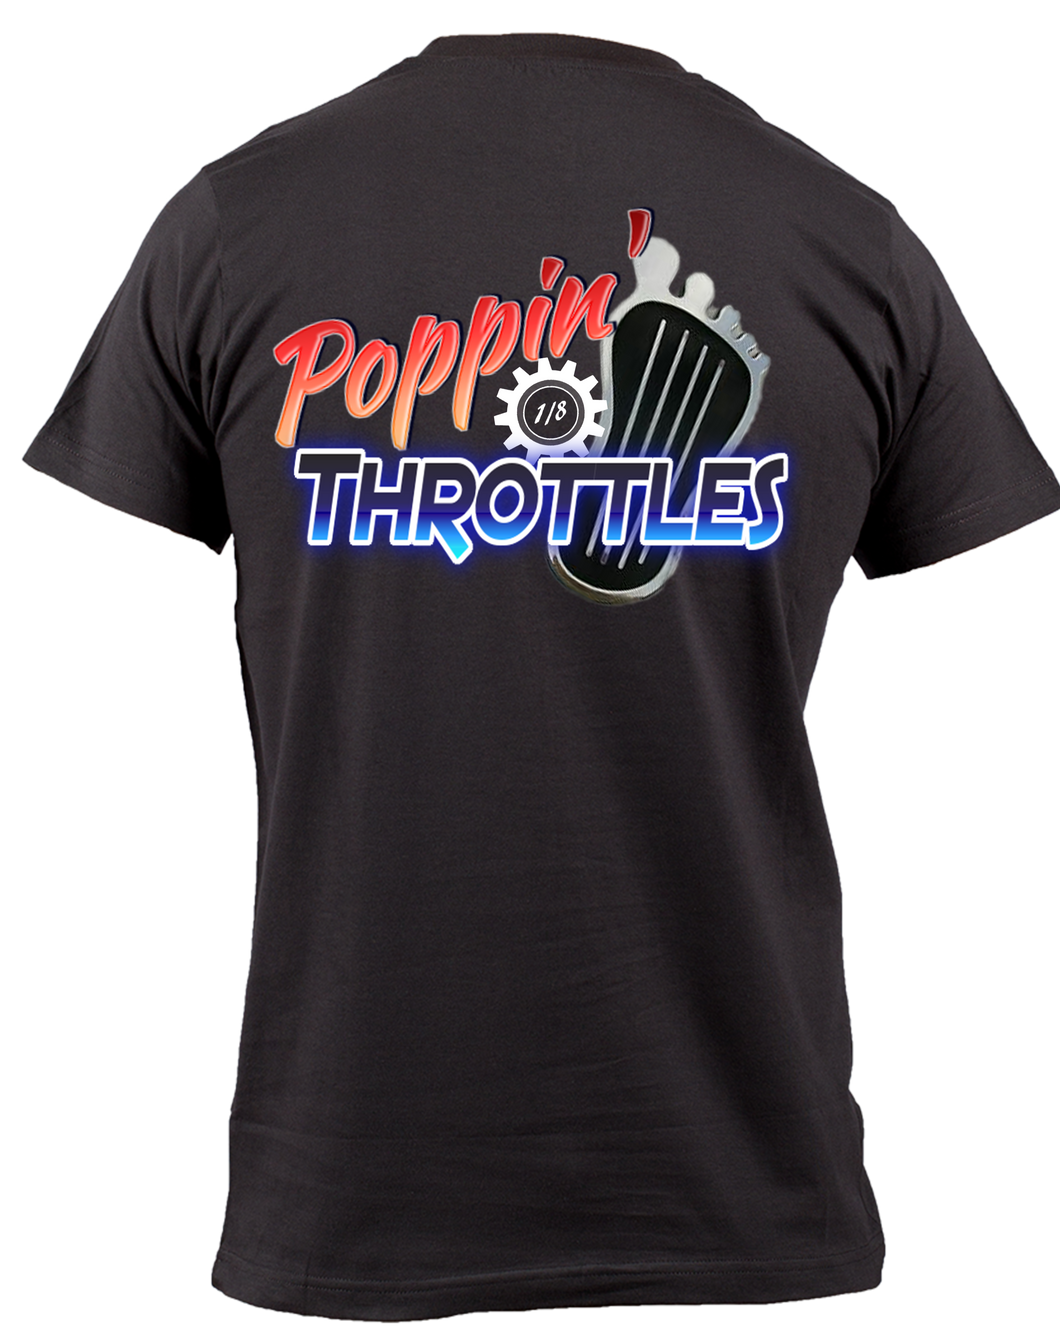 Poppin' Throttles Youth T